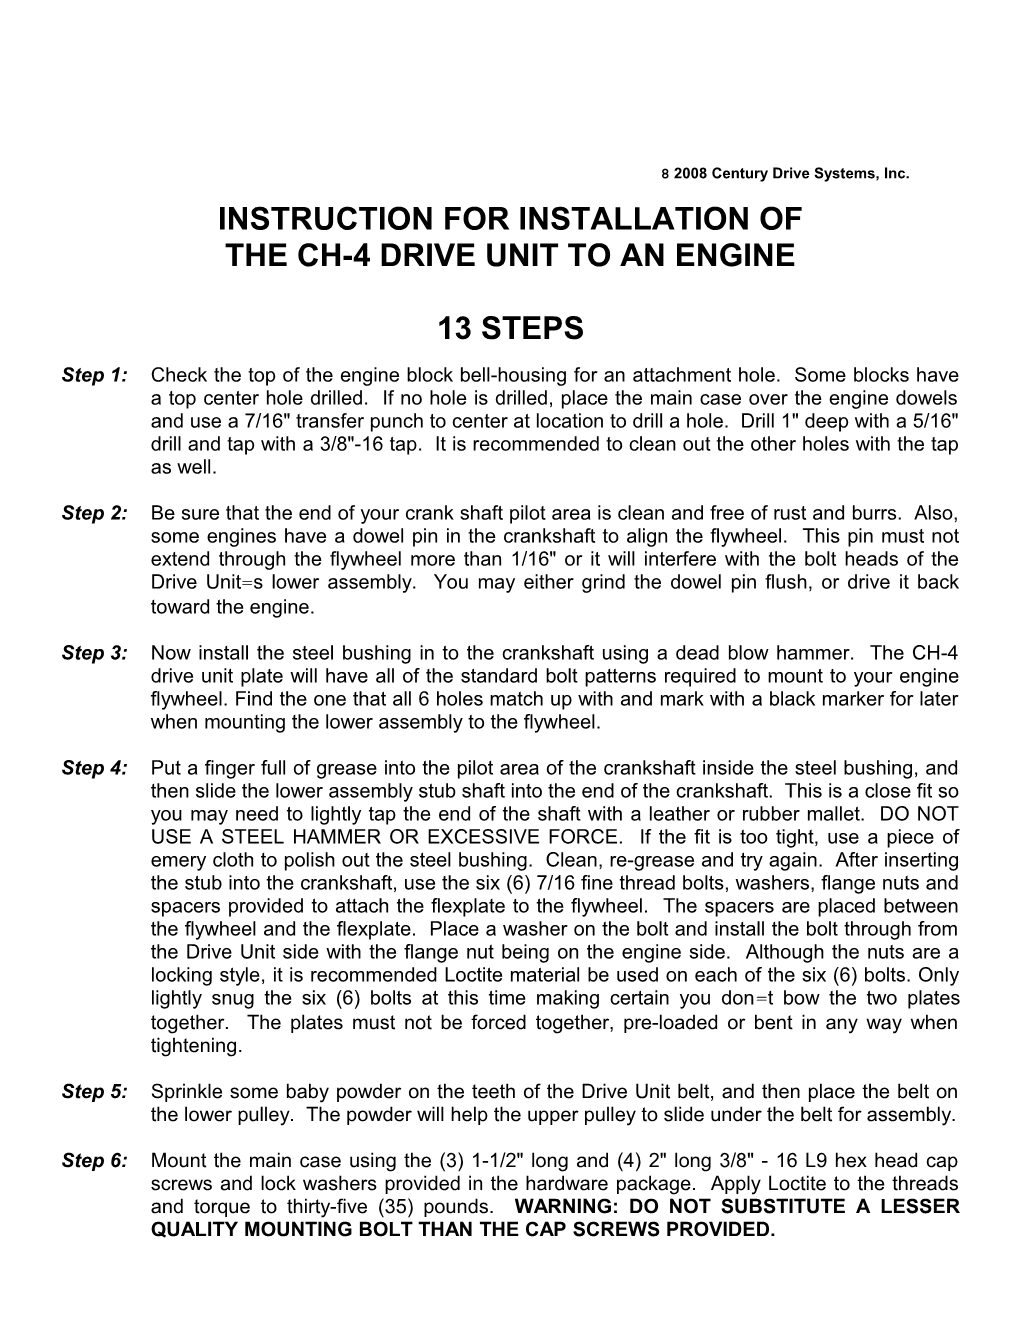 Instructions for Installation Of